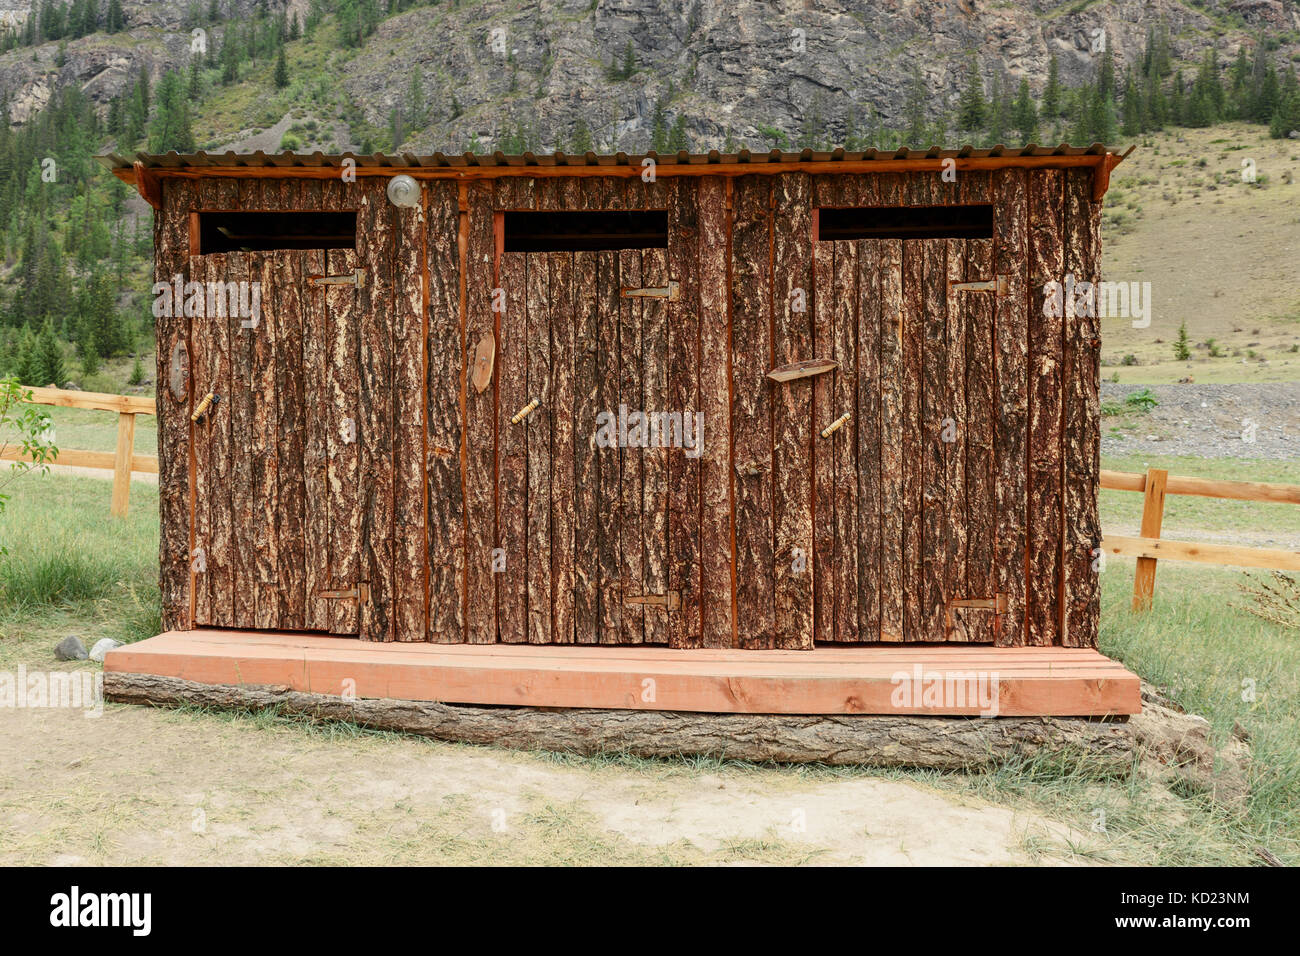 outdoor toilet made of wood in the reserve Stock Photo